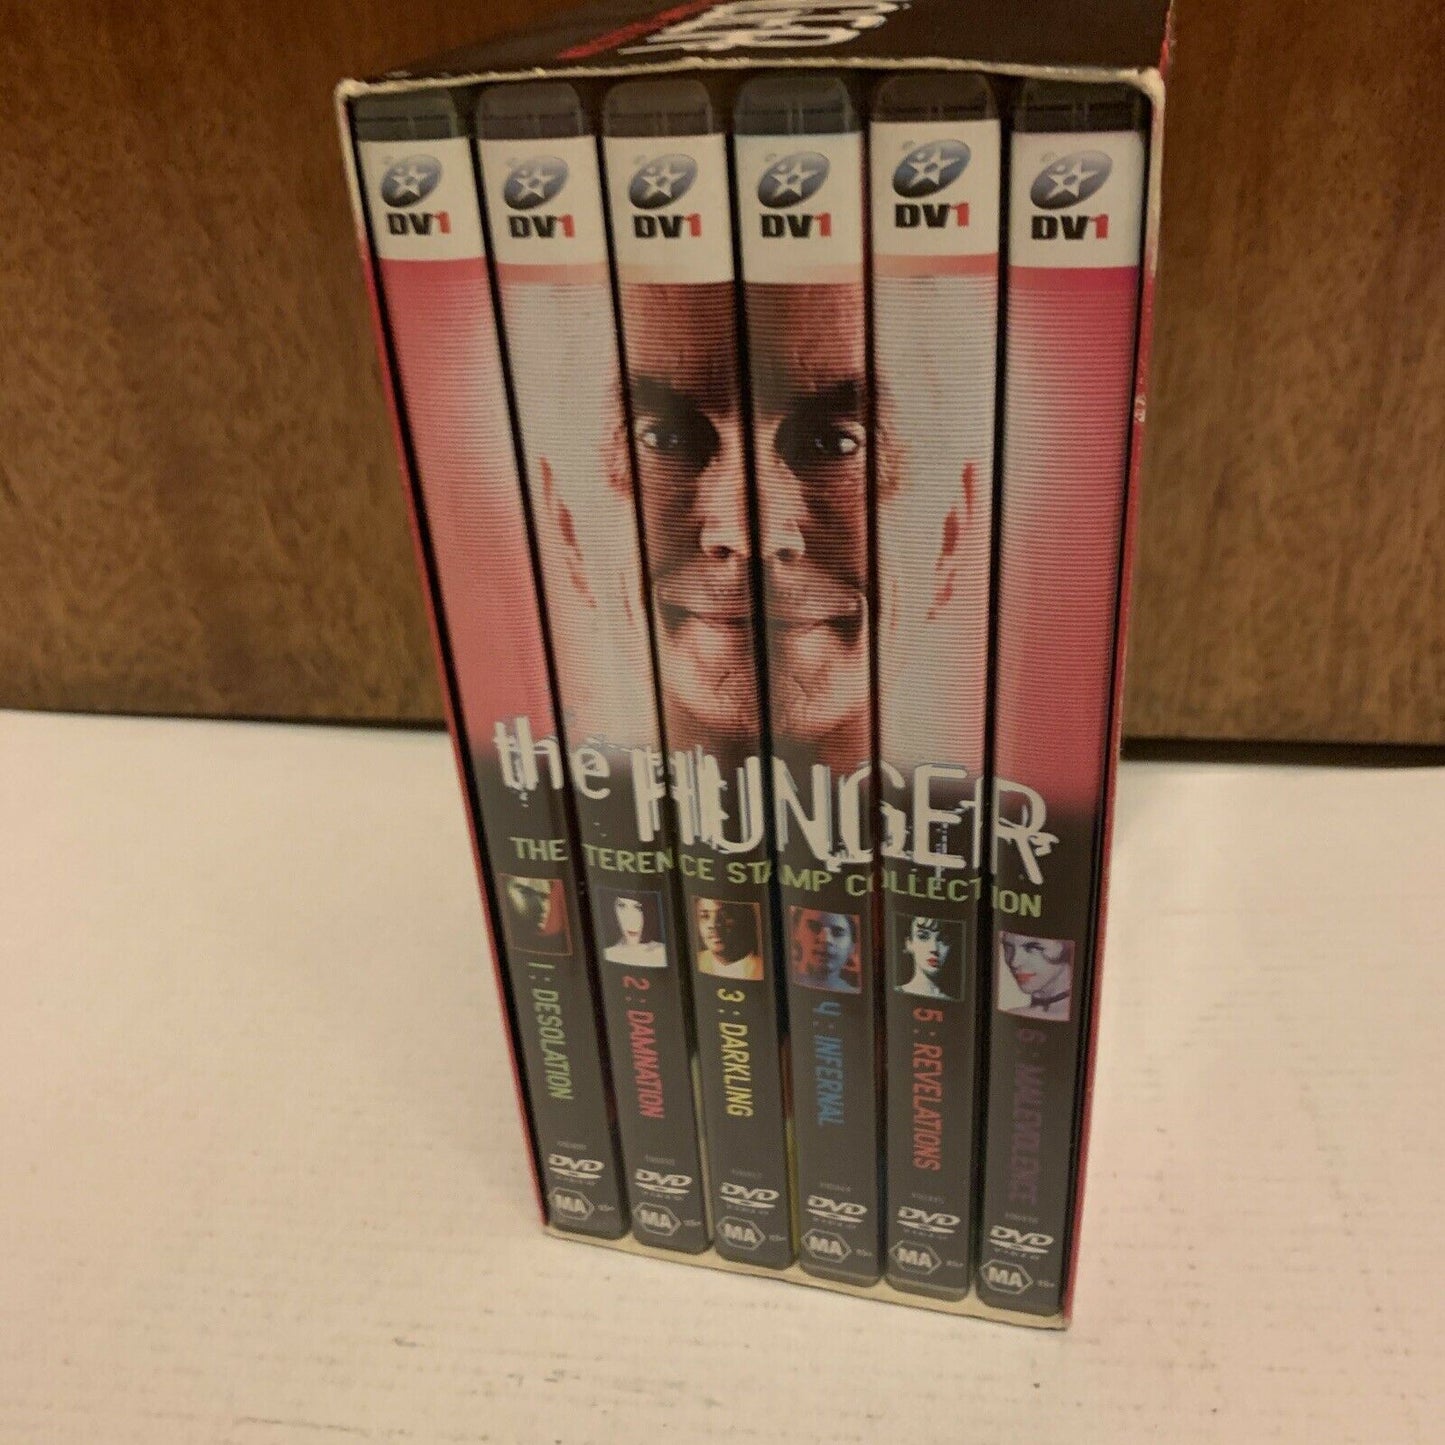 The Hunger - The Terrance Stamp Collection (DVD, 1997) Ridley Scott. Region 4